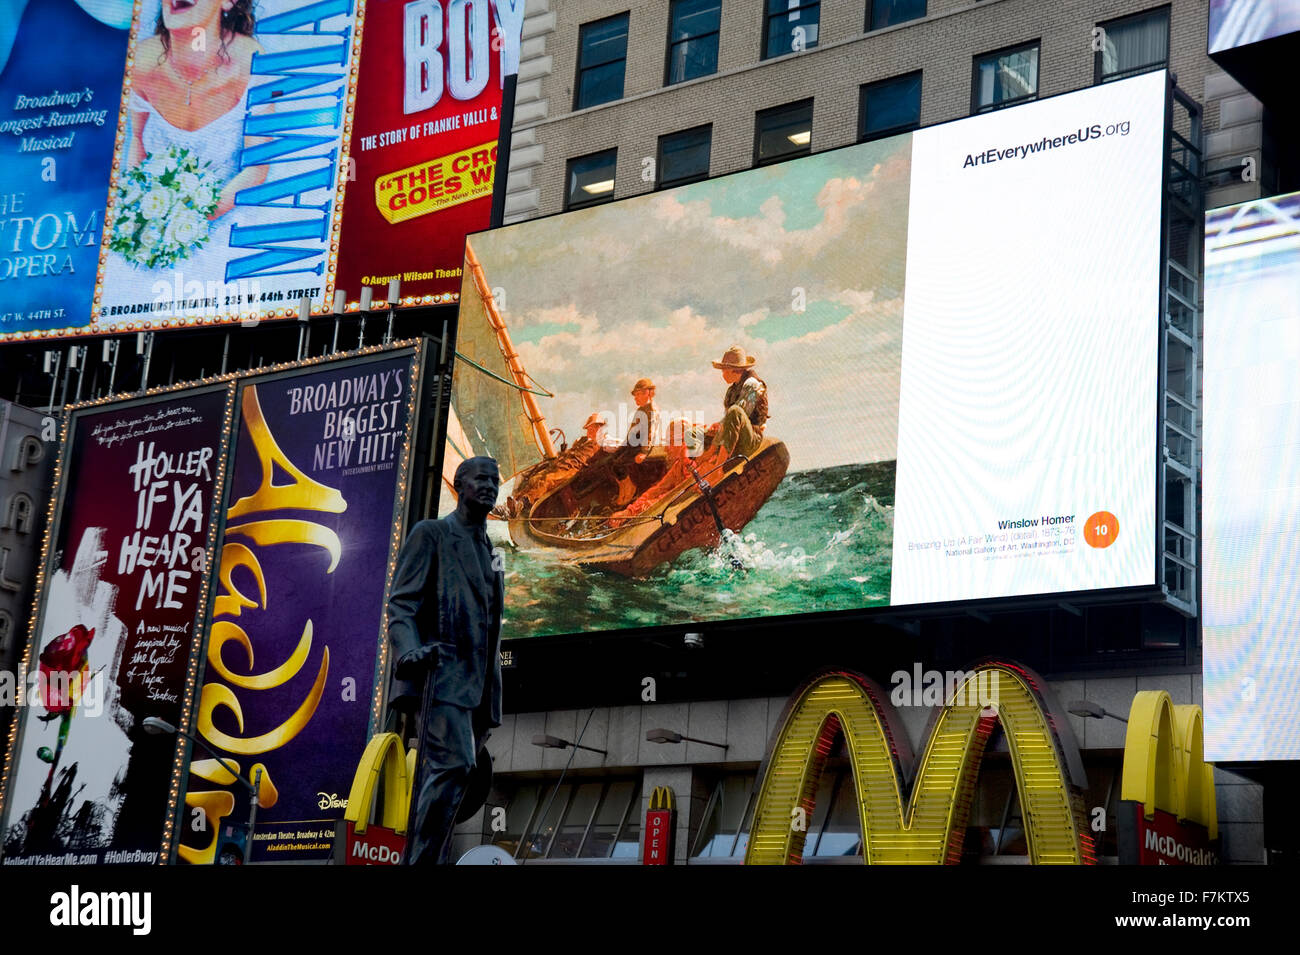 Winslow Homer painting  appearing on outdoor advertising display in Times Square as part of the Art Everywhere project in New York Stock Photo